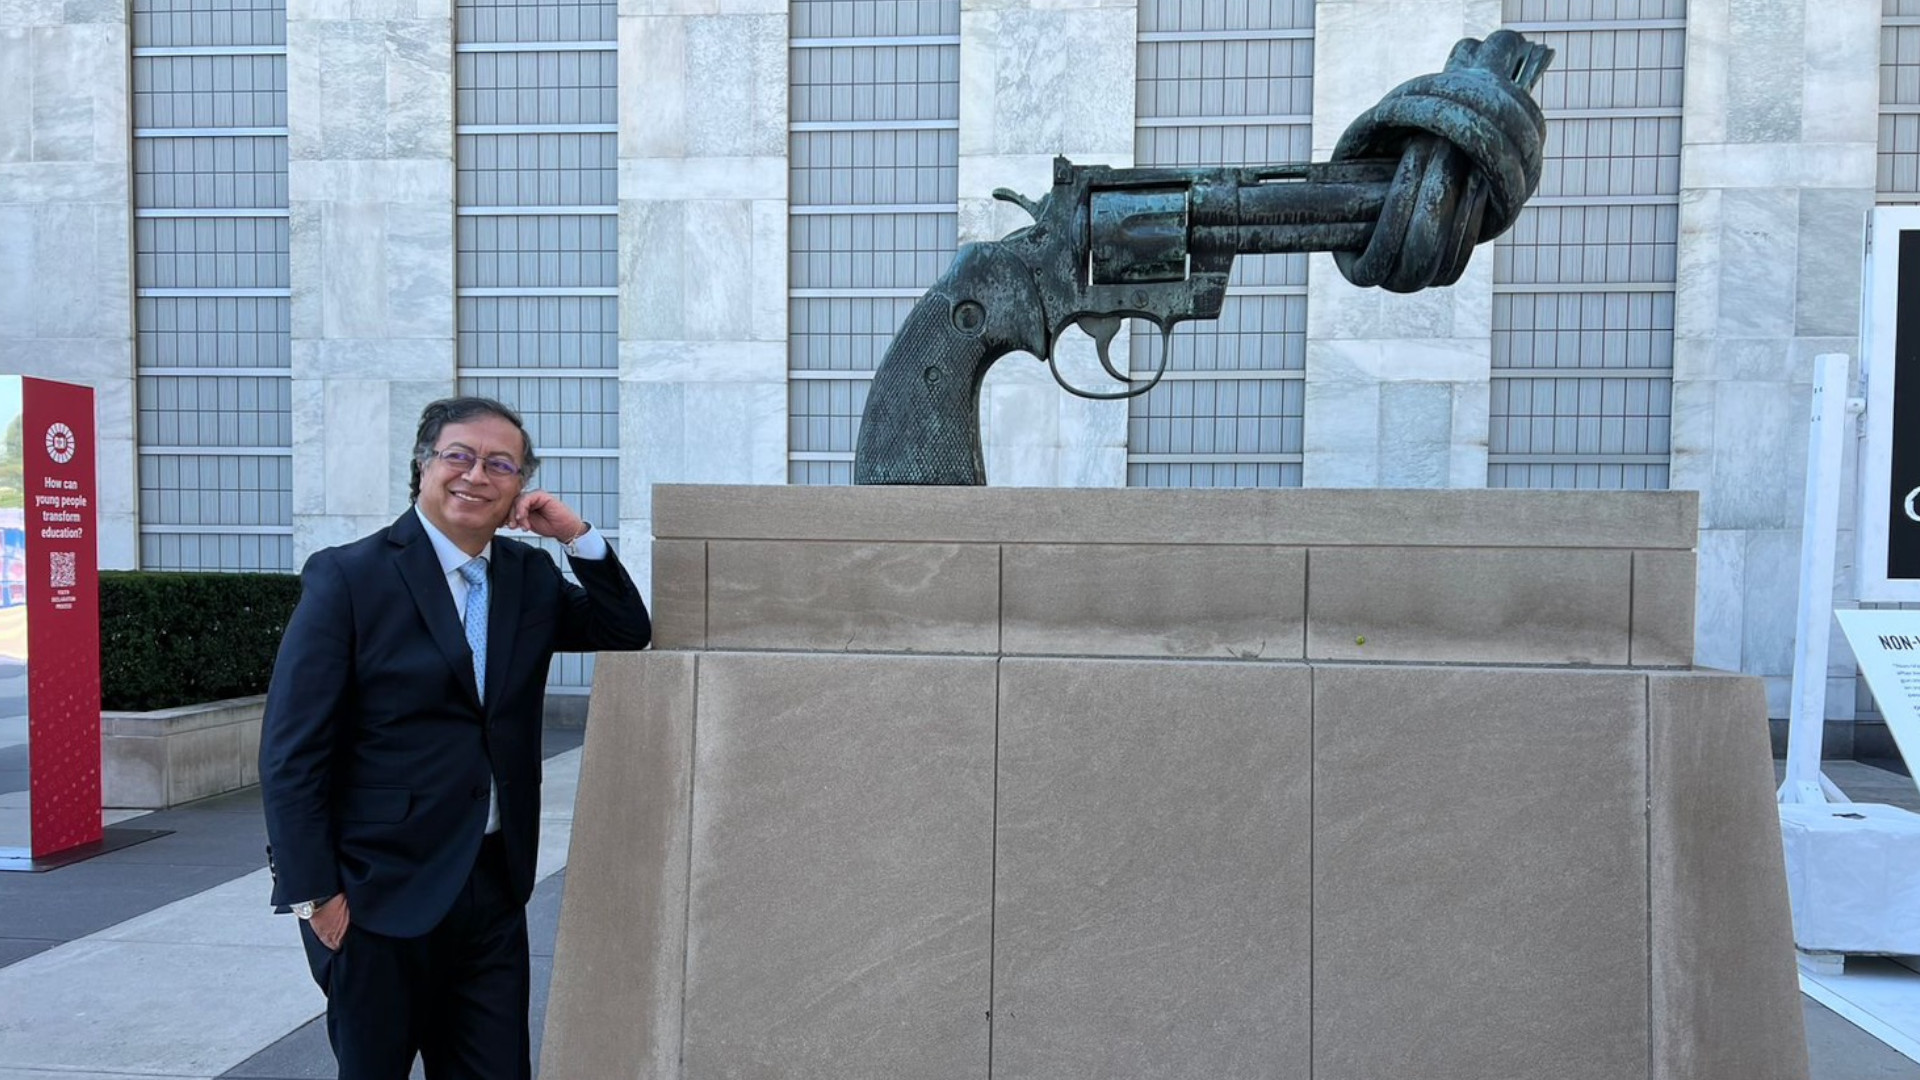 The president of Colombia, Gustavo Francisco Petro, poses next to the sculpture  "Nonviolence" either "the knotted gun" by the Swedish artist Karl Fredrik Reutersward and which is located at the entrance of the UN headquarters in New York (USA).  Photo: @petrogustavo